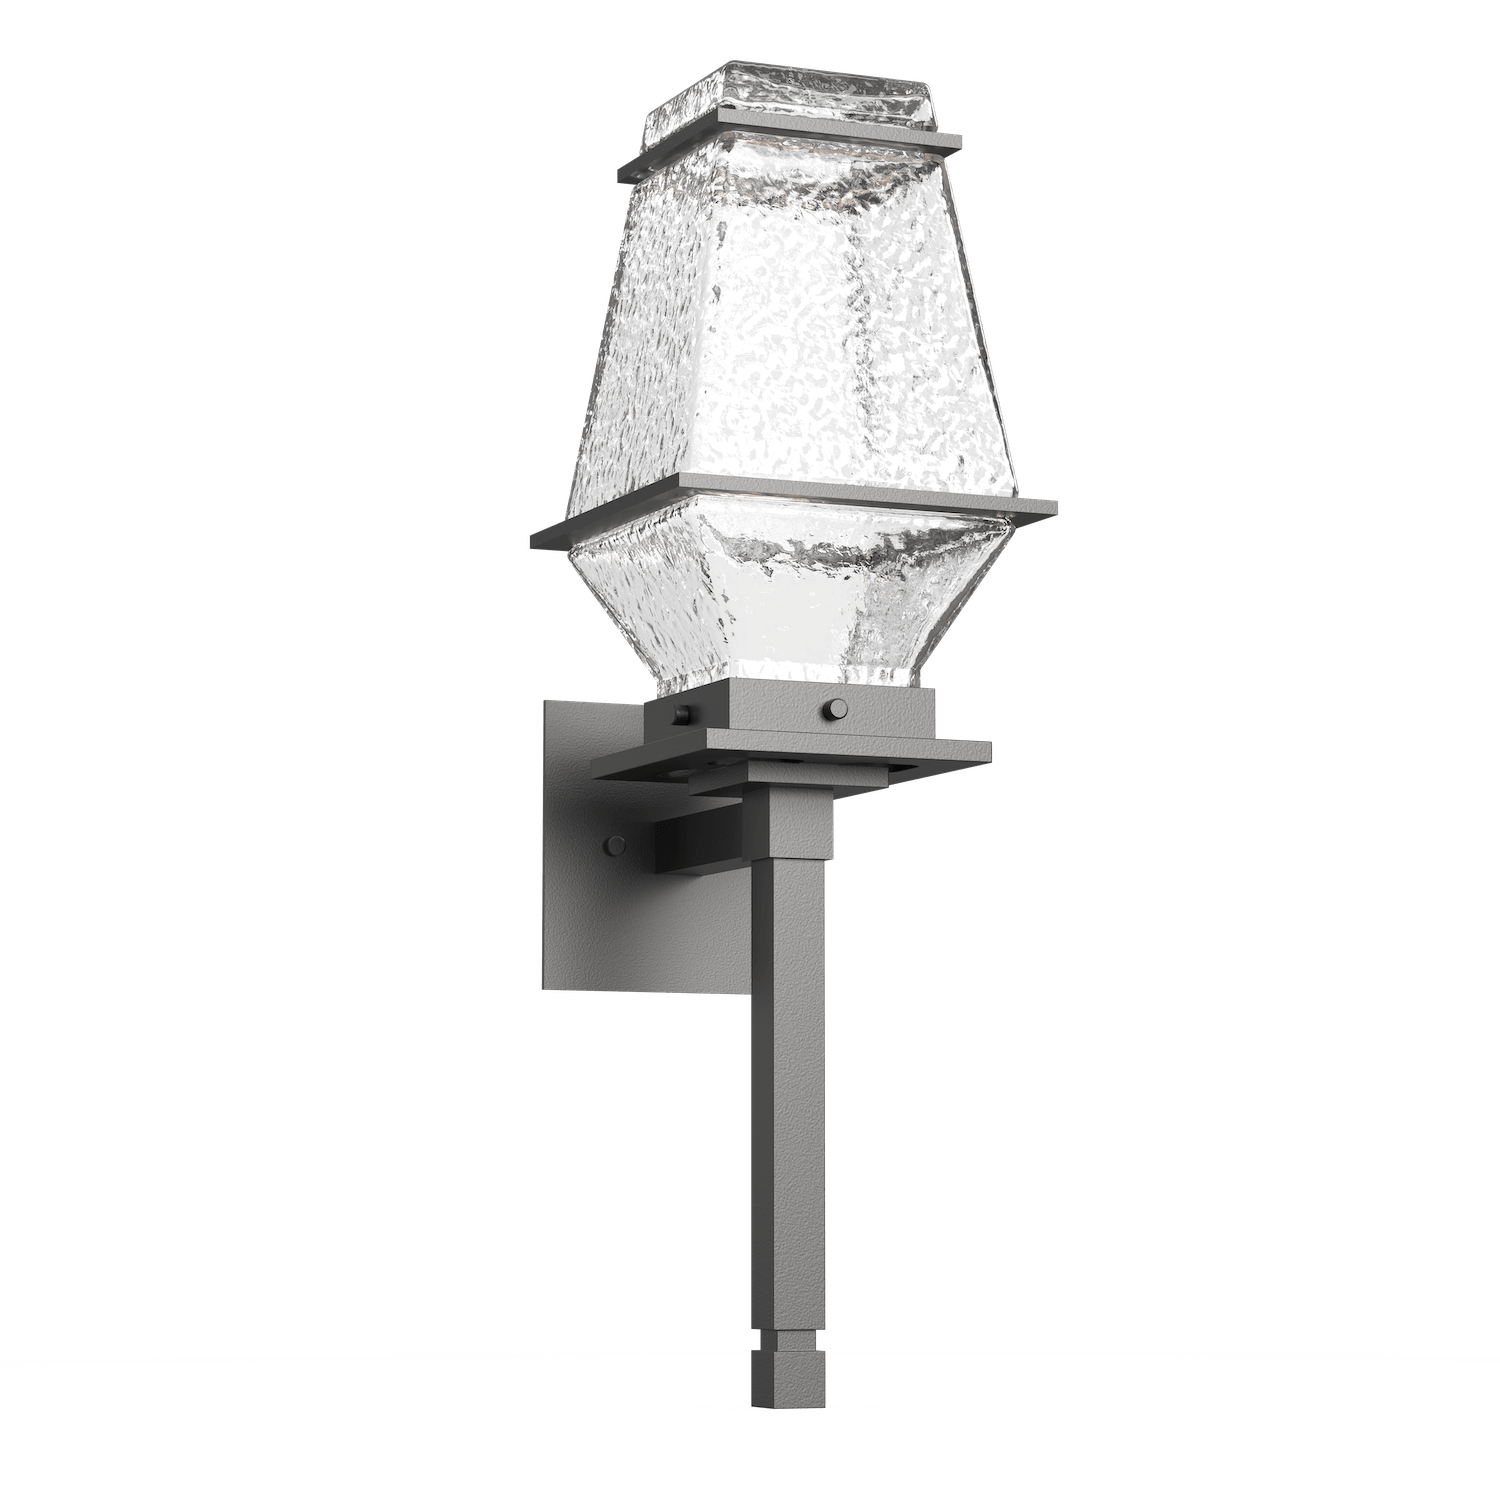 ODB0077-03-AG-C-Hammerton-Studio-Landmark-24-inch-outdoor-torch-sconce-with-argento-grey-finish-and-clear-blown-glass-shades-and-LED-lamping